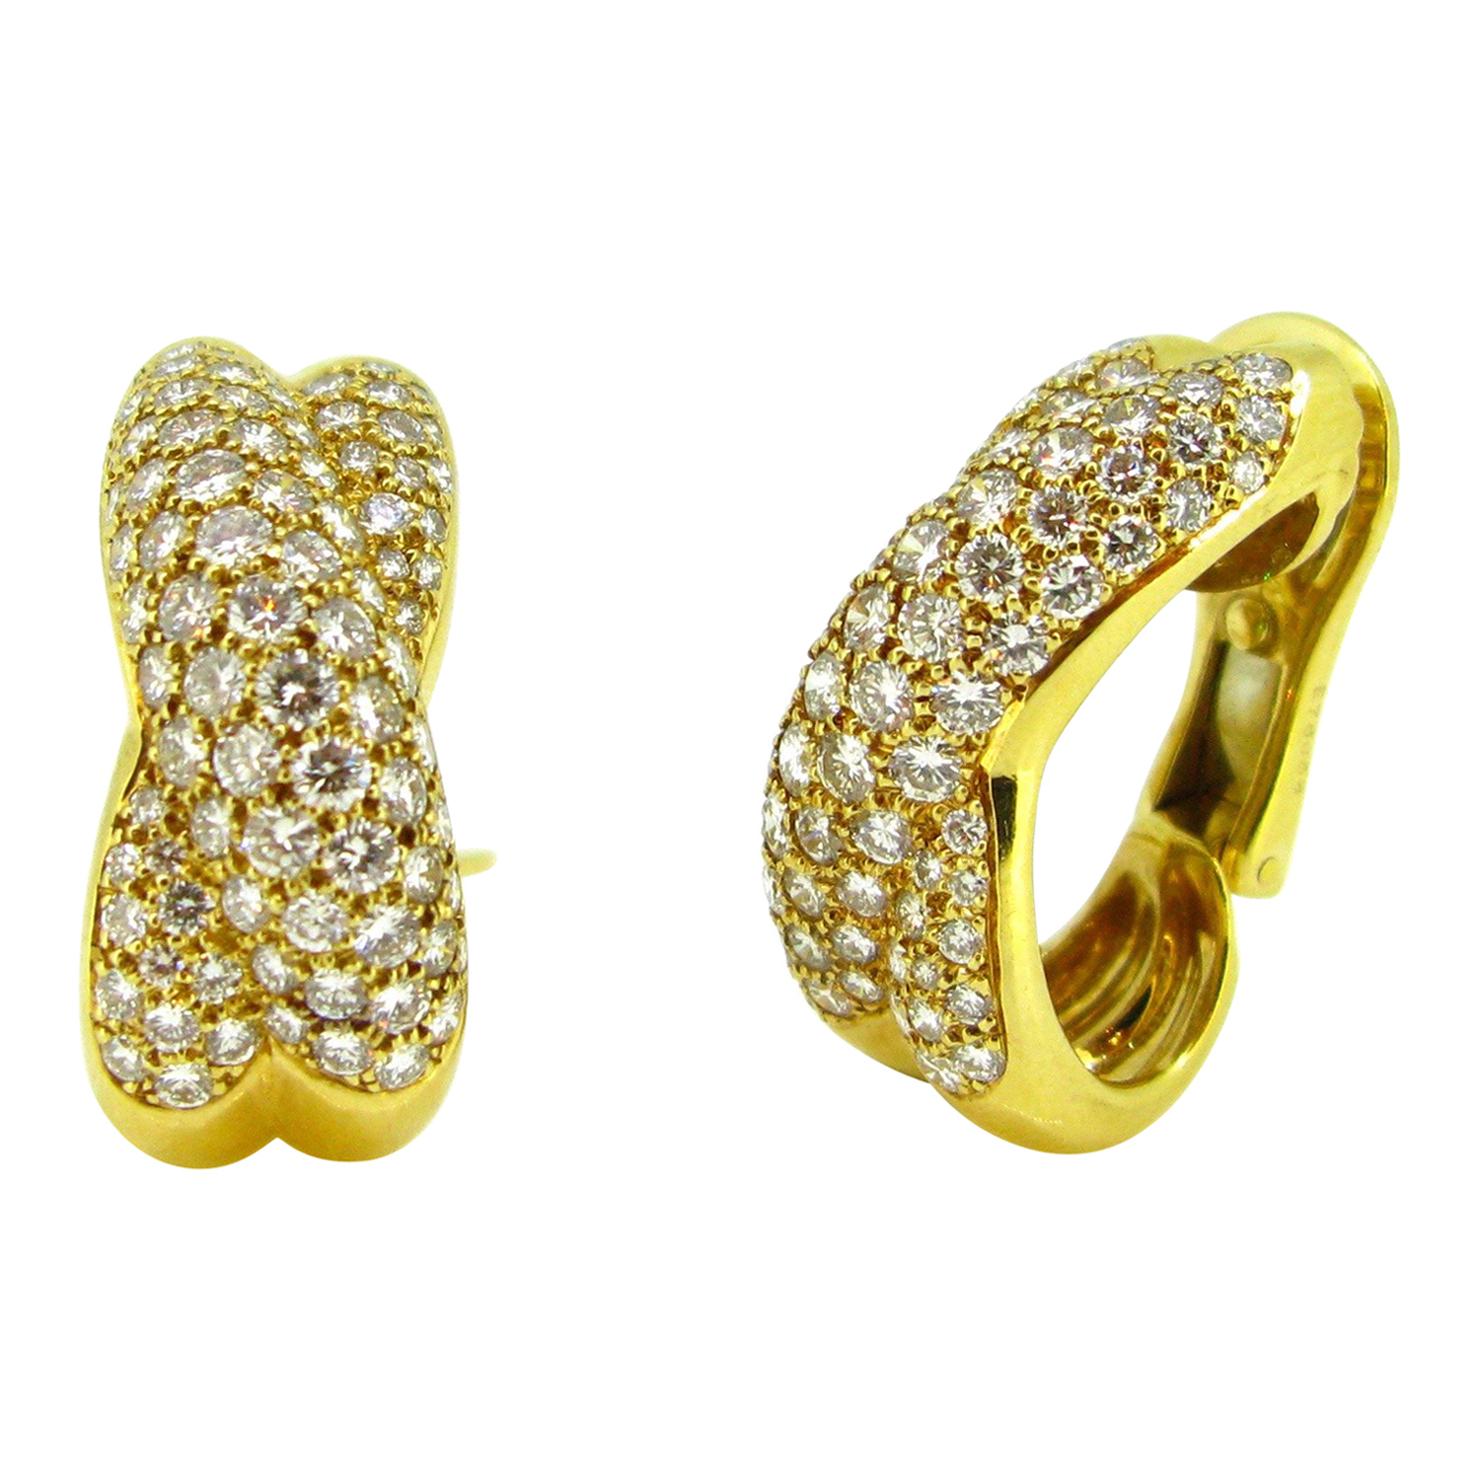 Cartier Diamonds Crossover Yellow Gold Earrings